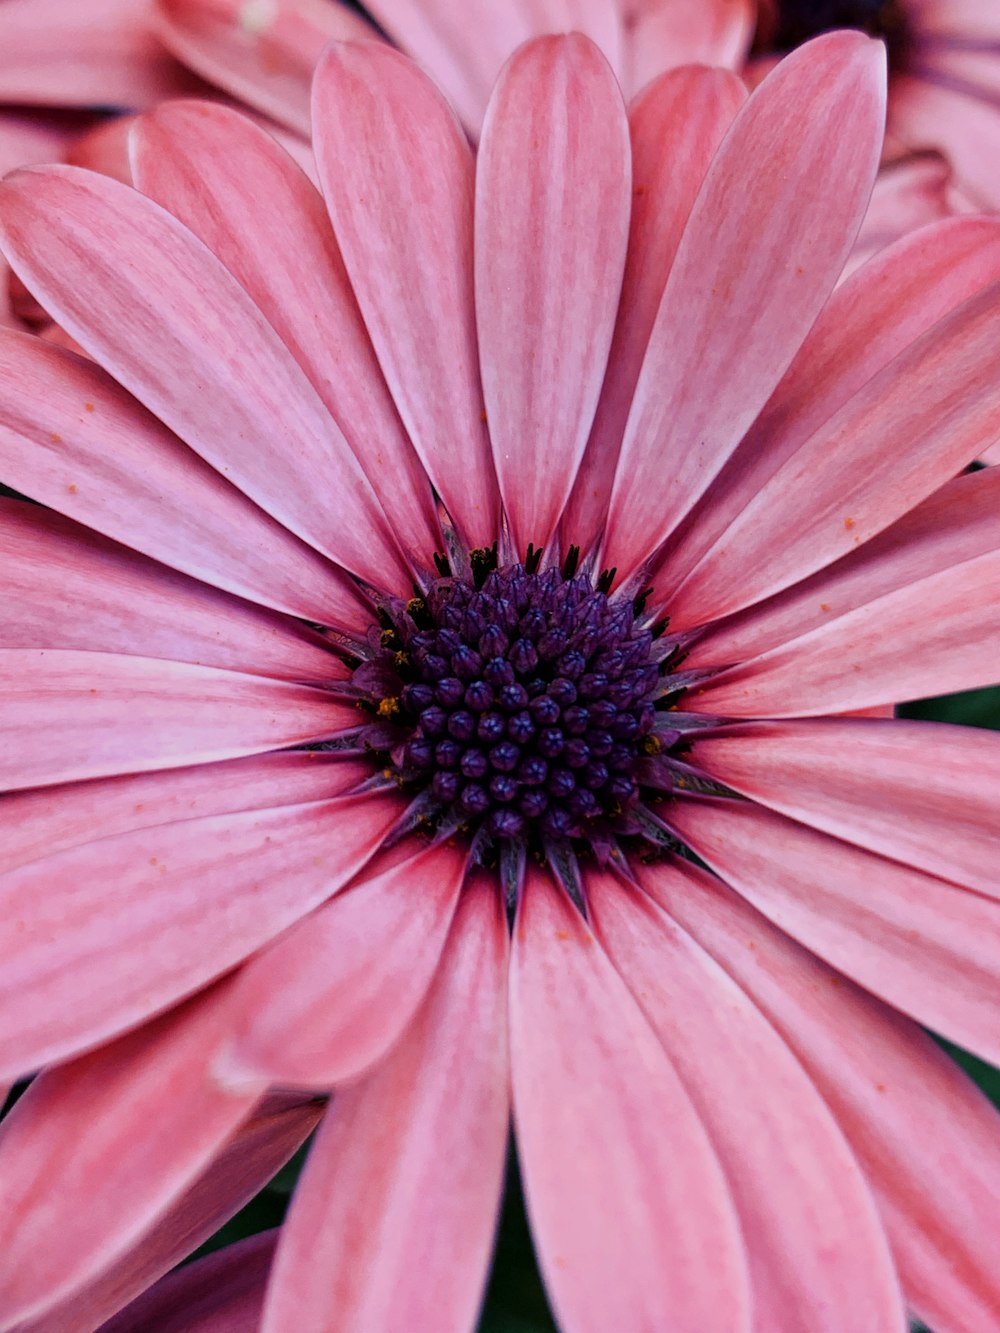 a close up of a pink flower with a purple center